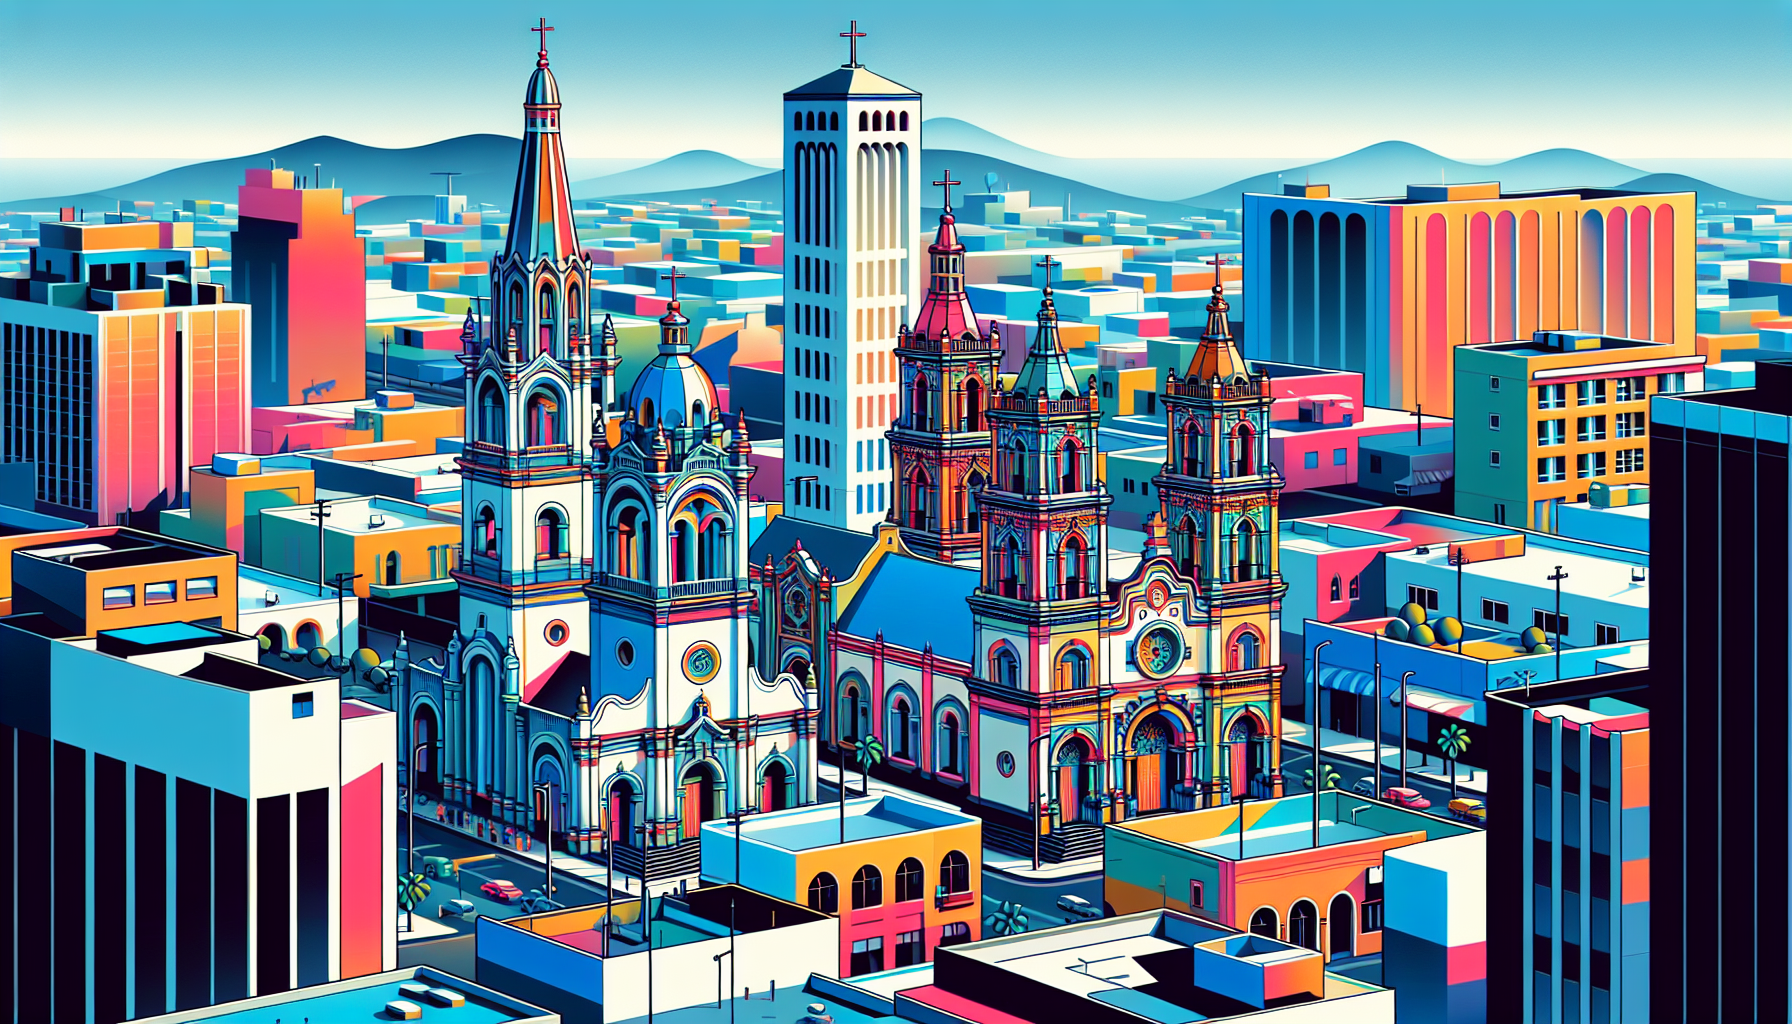 Create an image of a series of iconic churches in Tijuana, Mexico, showcasing the diverse architecture and spiritual significance of these places of worship in the border city. Capture the unique blen